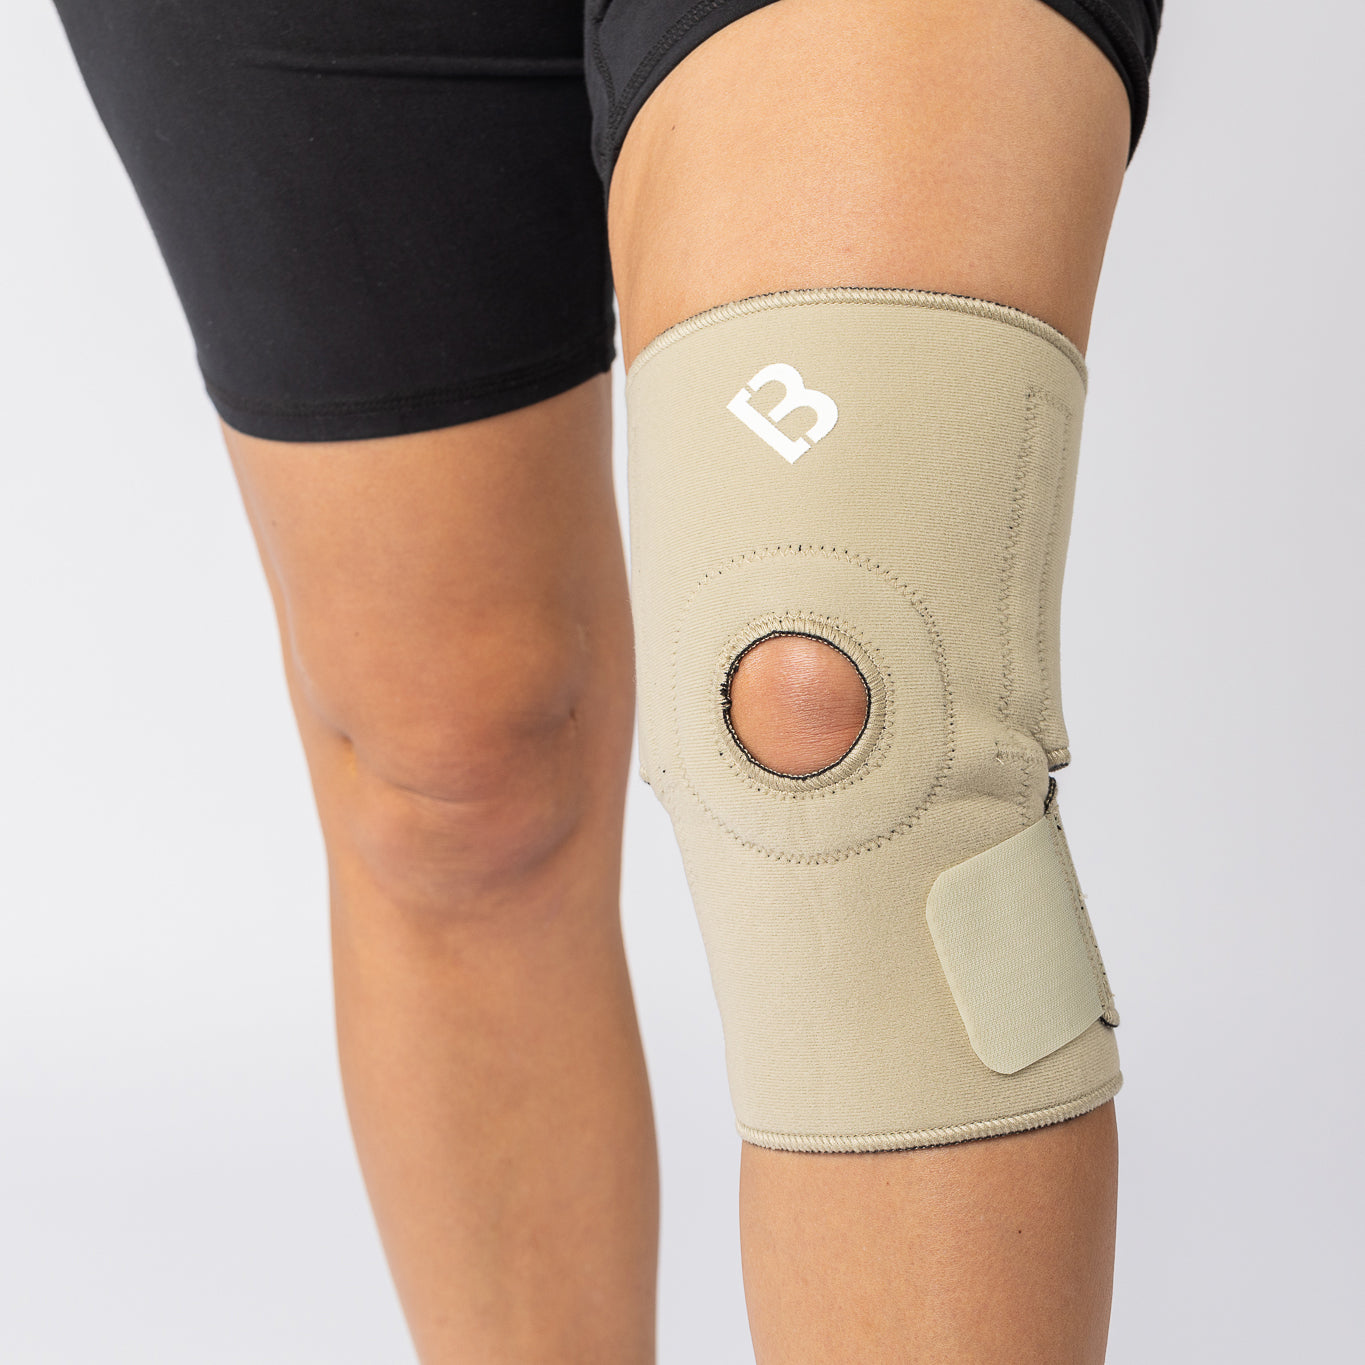 The Bio Magnetic Knee Support in beige being worn by a woman and it is viewed from the front side, showing the excellent fit of the magnetic knee support.